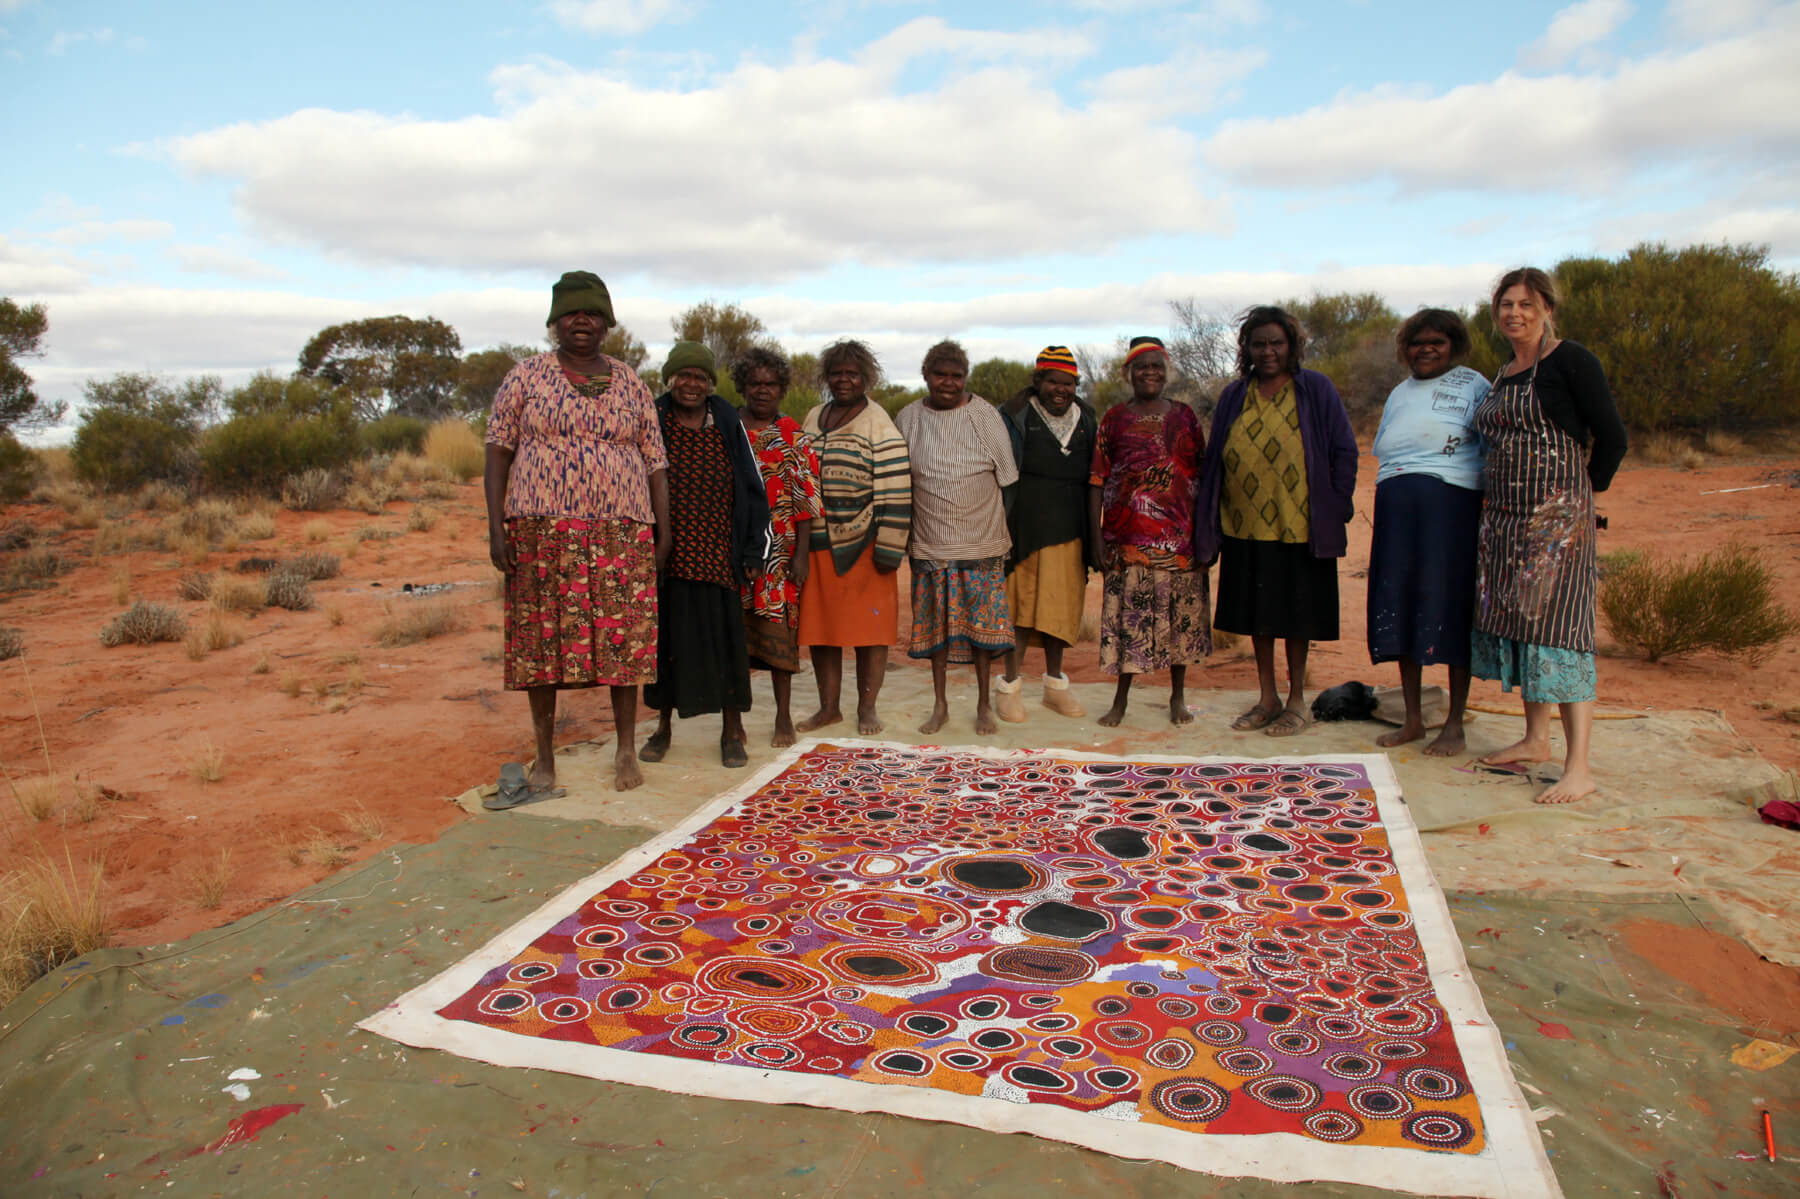 Women from Spinifex Arts standing around a lage colourful canvas showing places of significance.